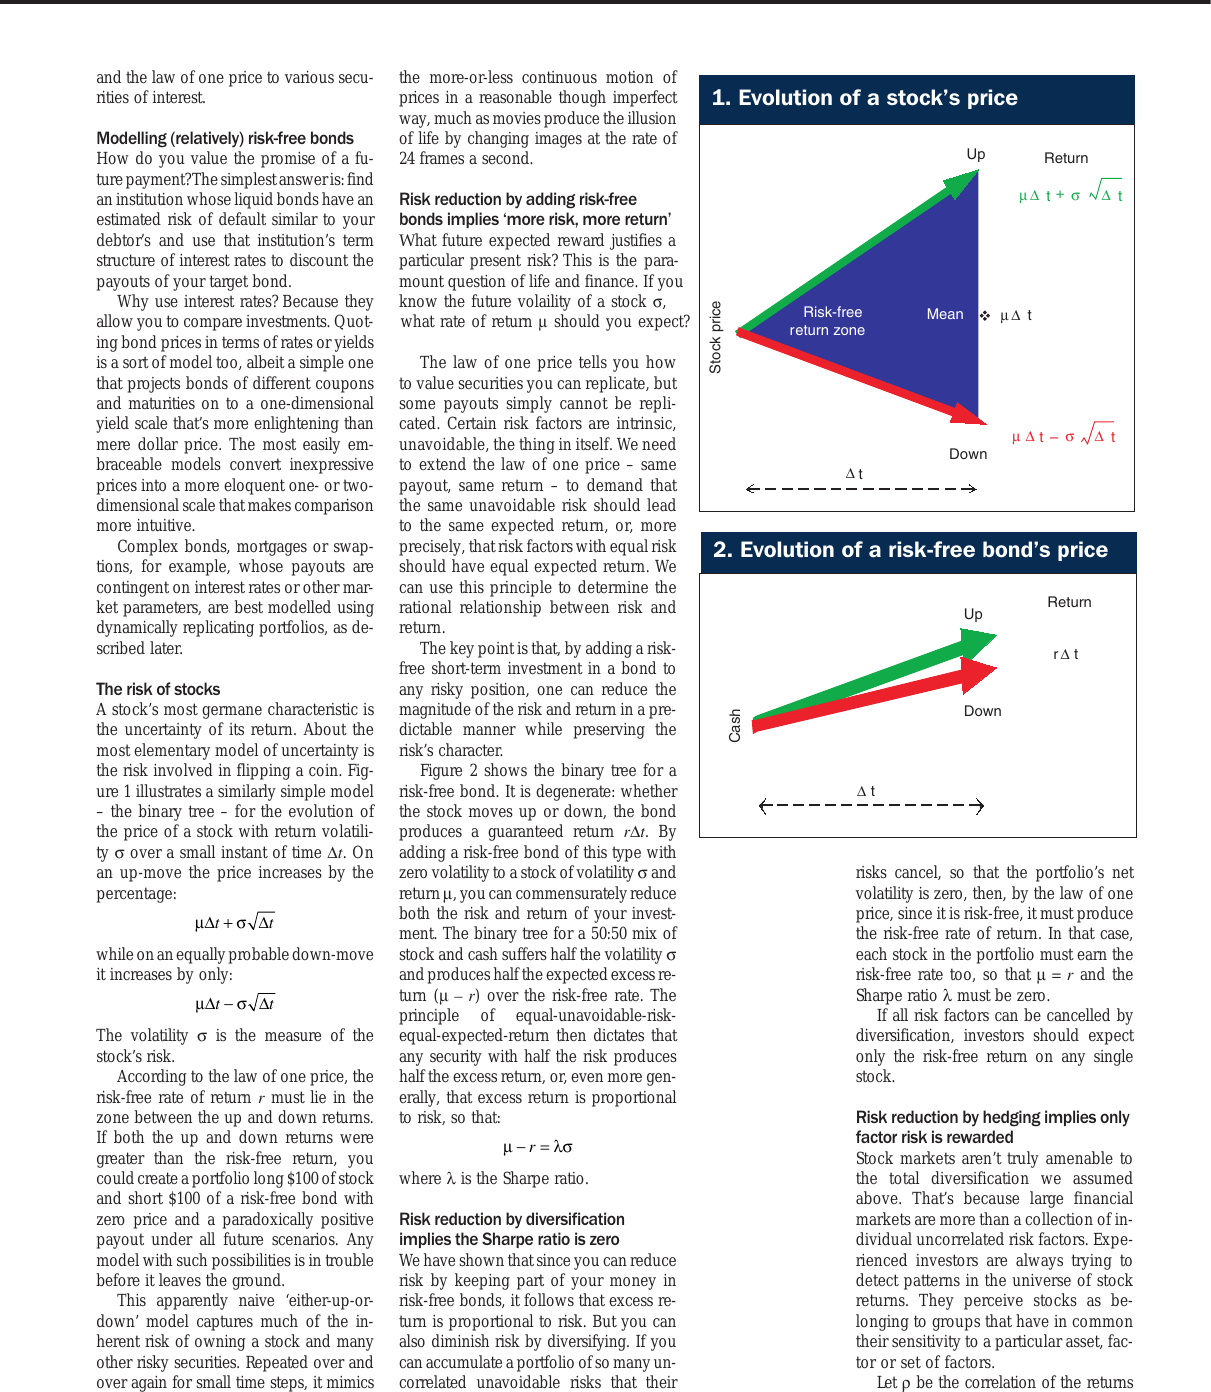 Page 2 of 3 - Derman Risk-the Boys Guide HEDGE